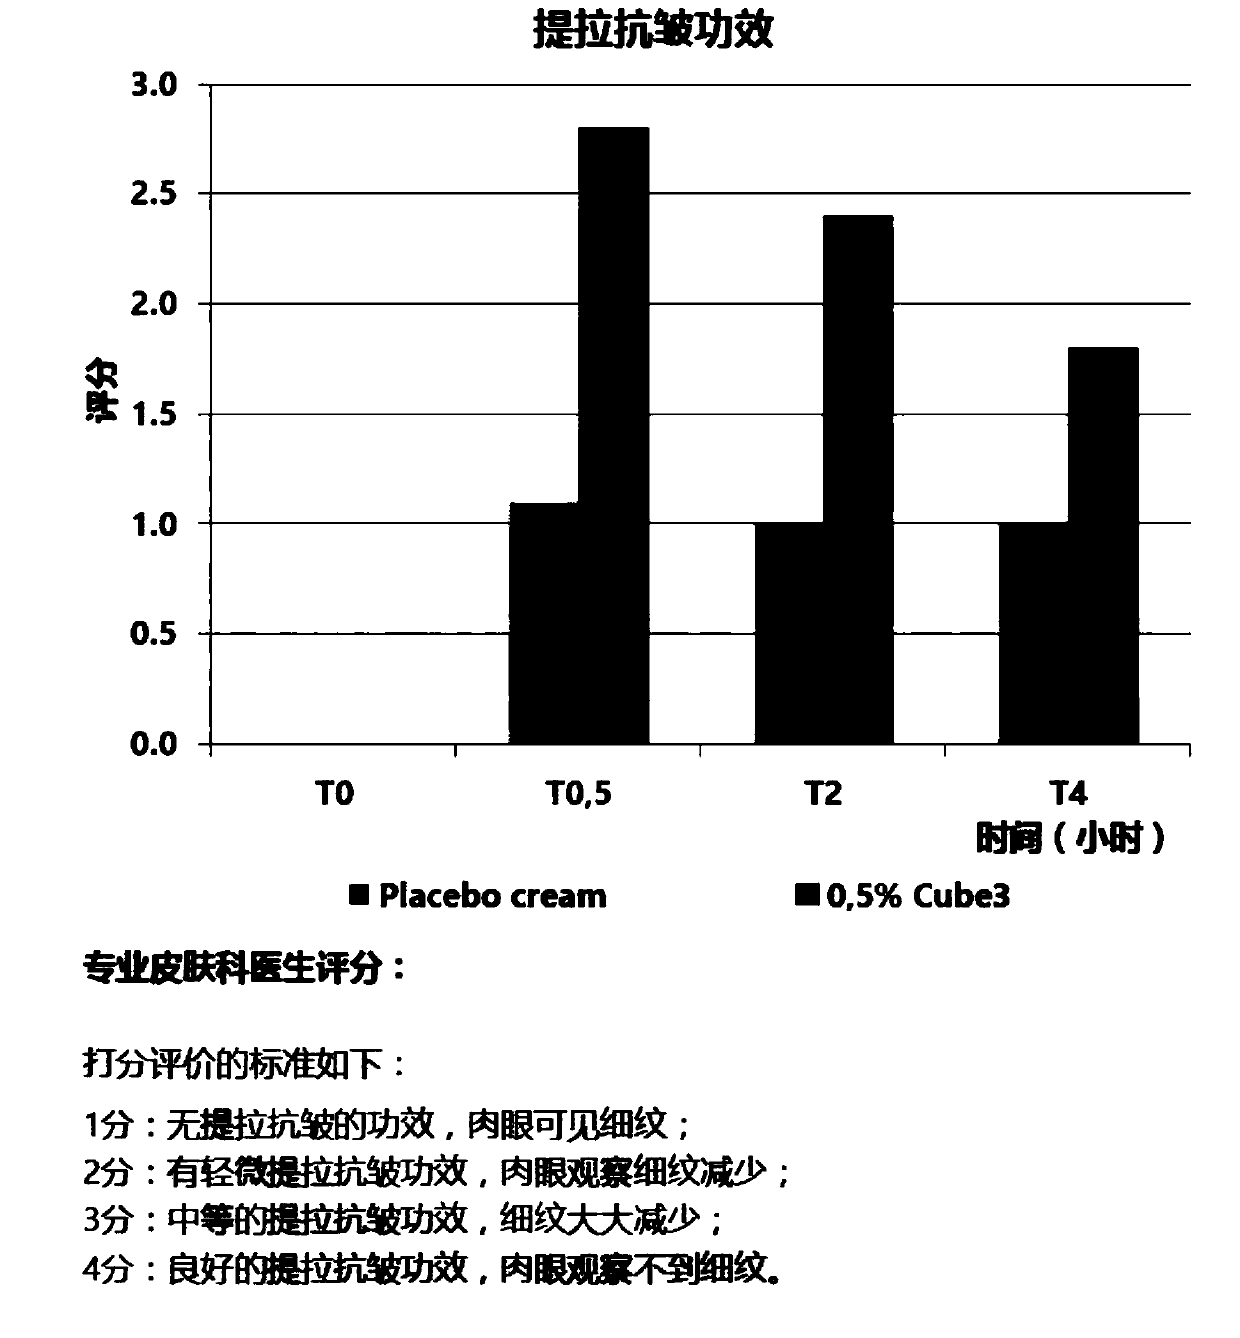 Preparation method of anti-wrinkle skin care product composition containing acetyl hexapeptide-8